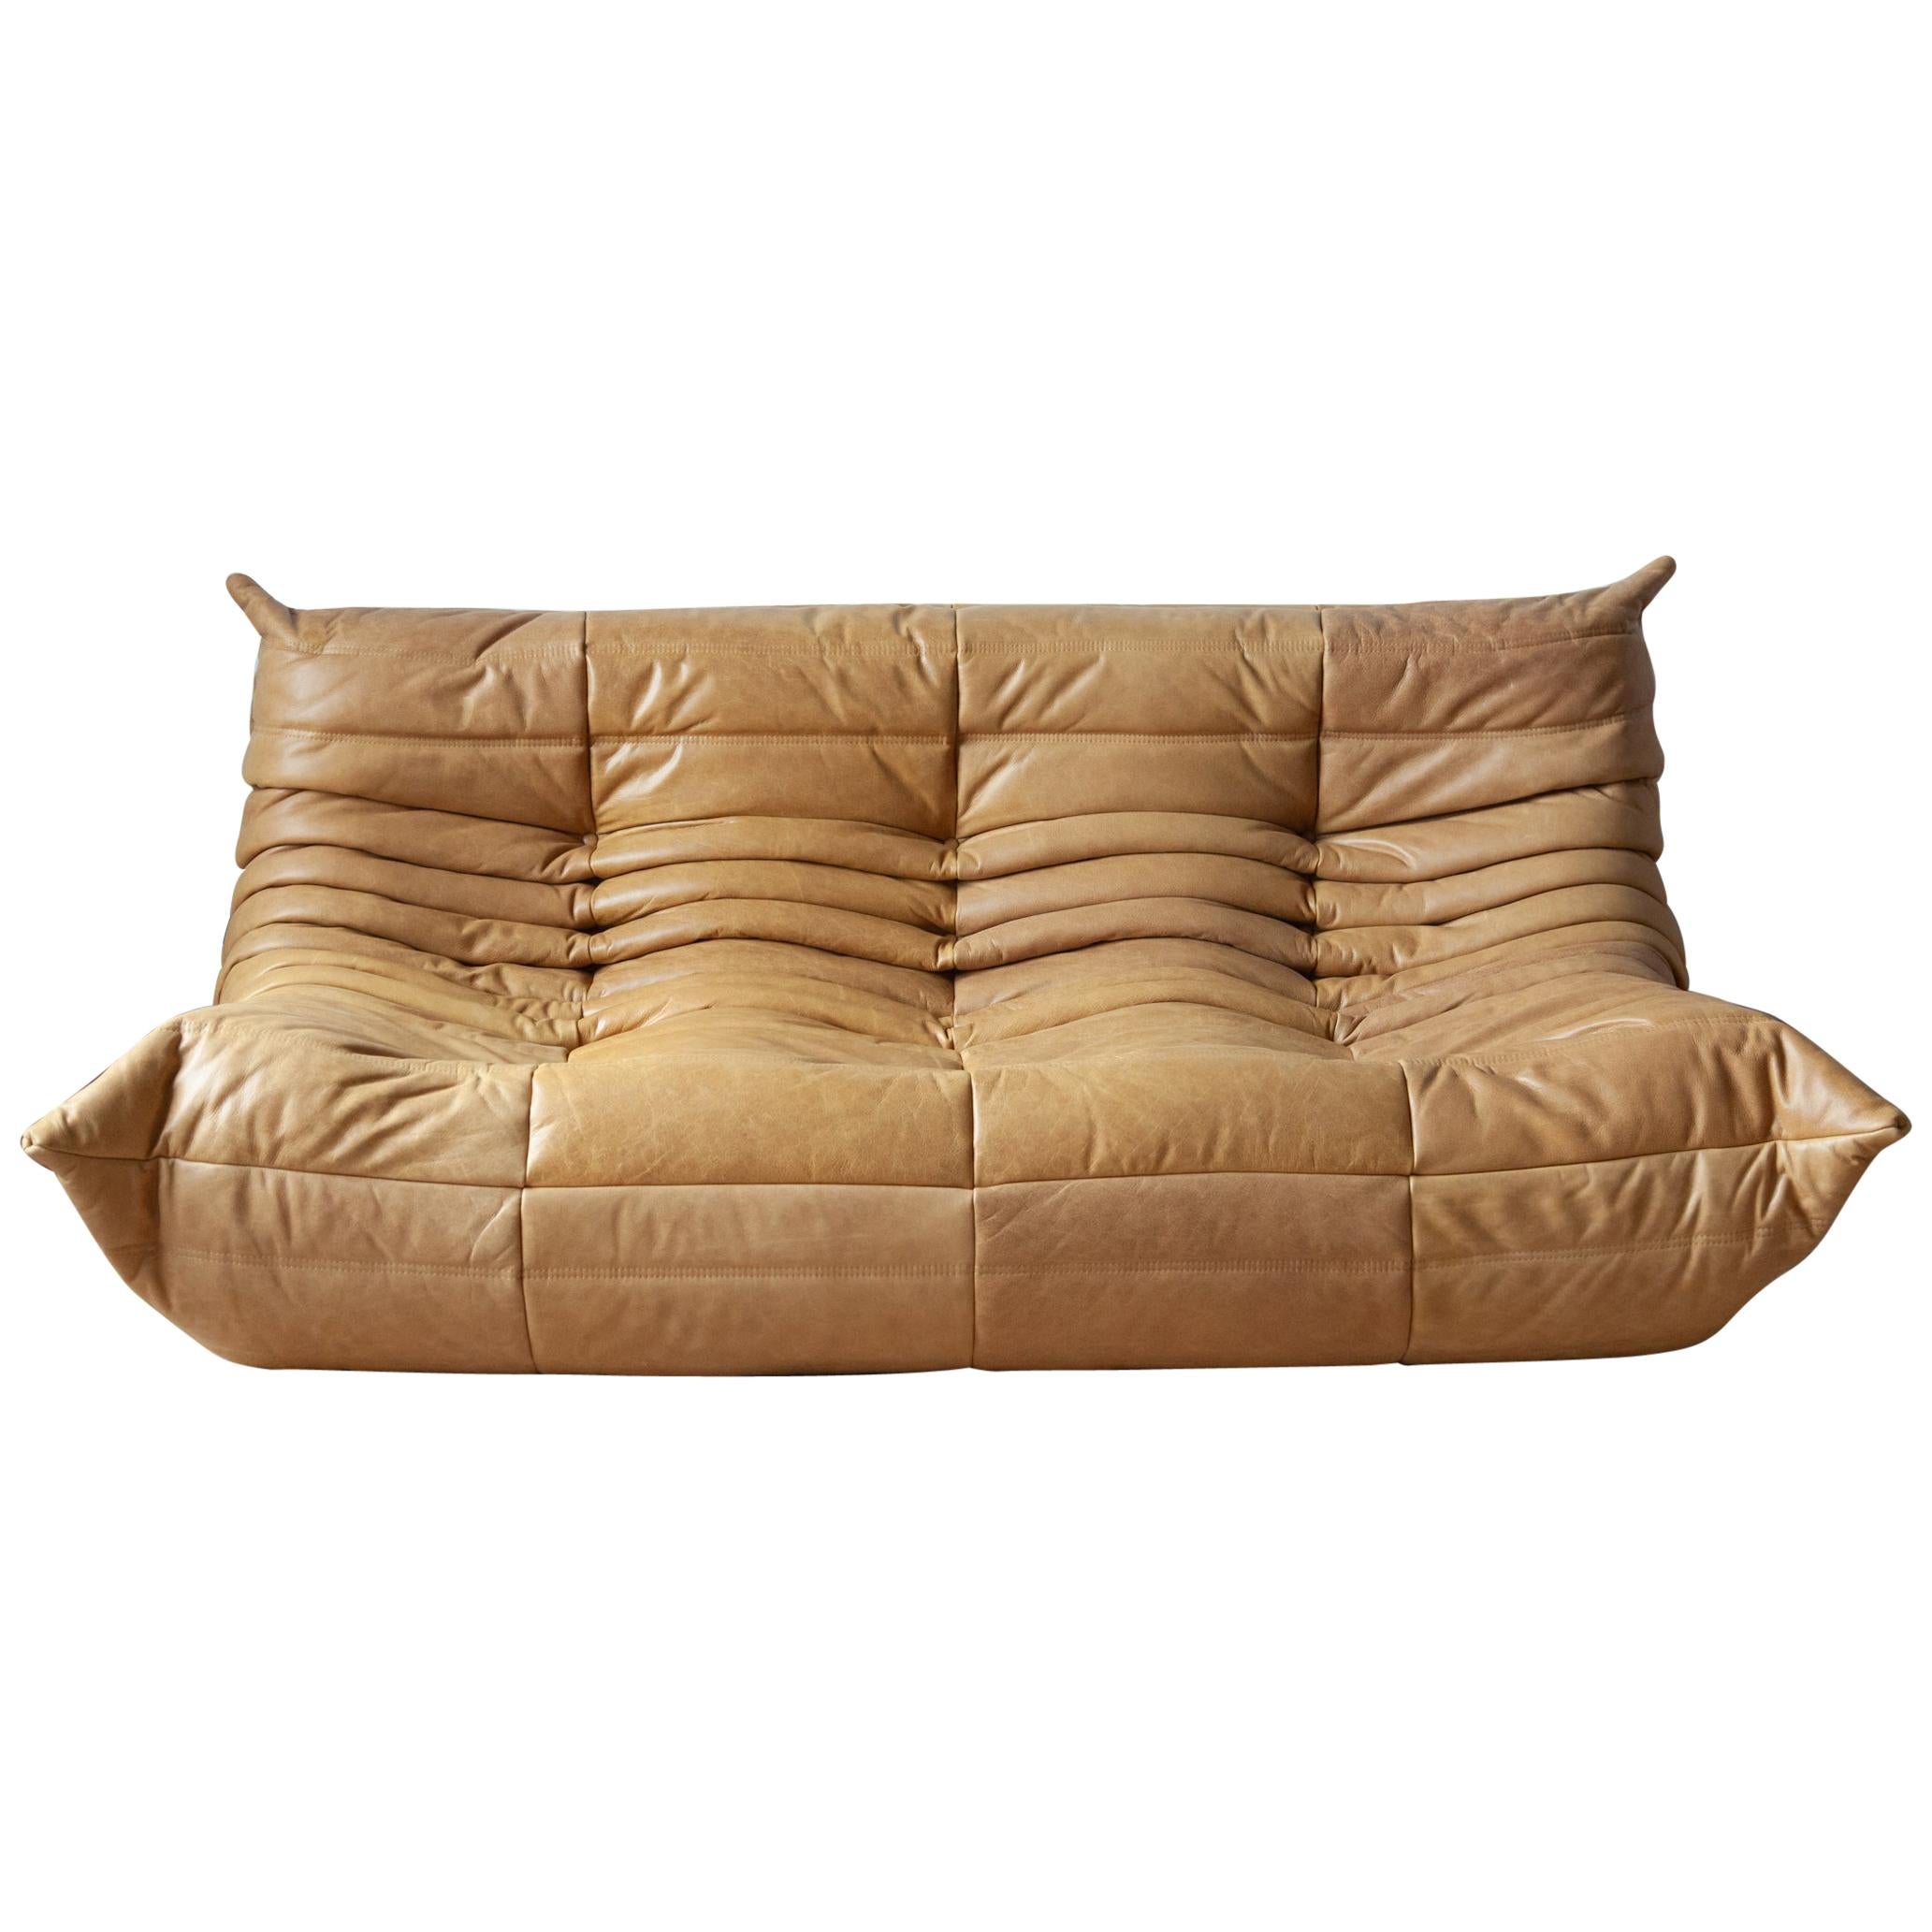 Togo 3-Seat Sofa in Camel Brown Leather by Michel Ducaroy for Ligne Roset For Sale